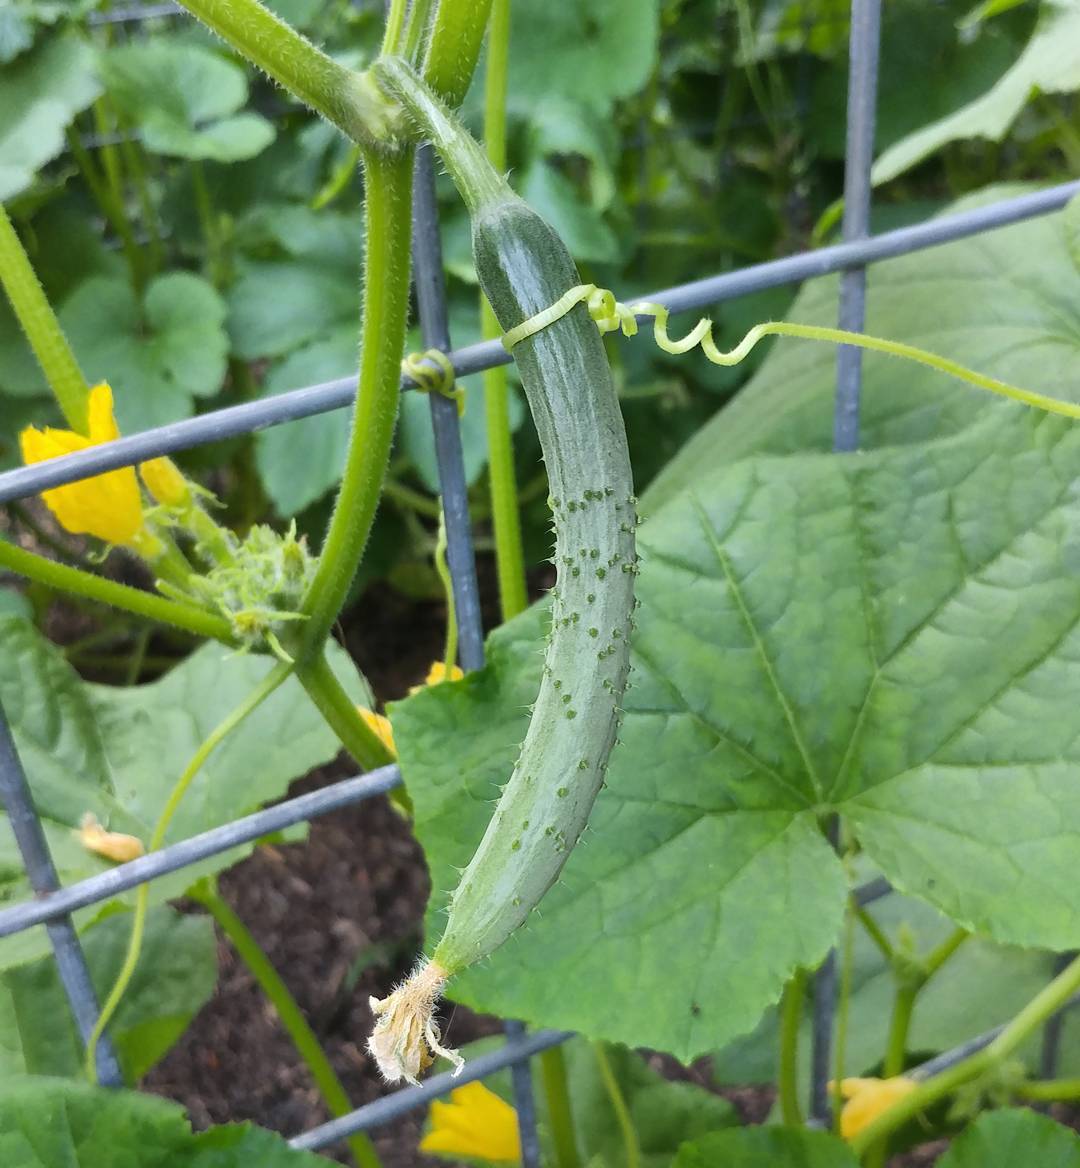 Dear Cucumber,
You are making poor life choices. Strangling your offspring is not cool.
Respectfully,
Jesse